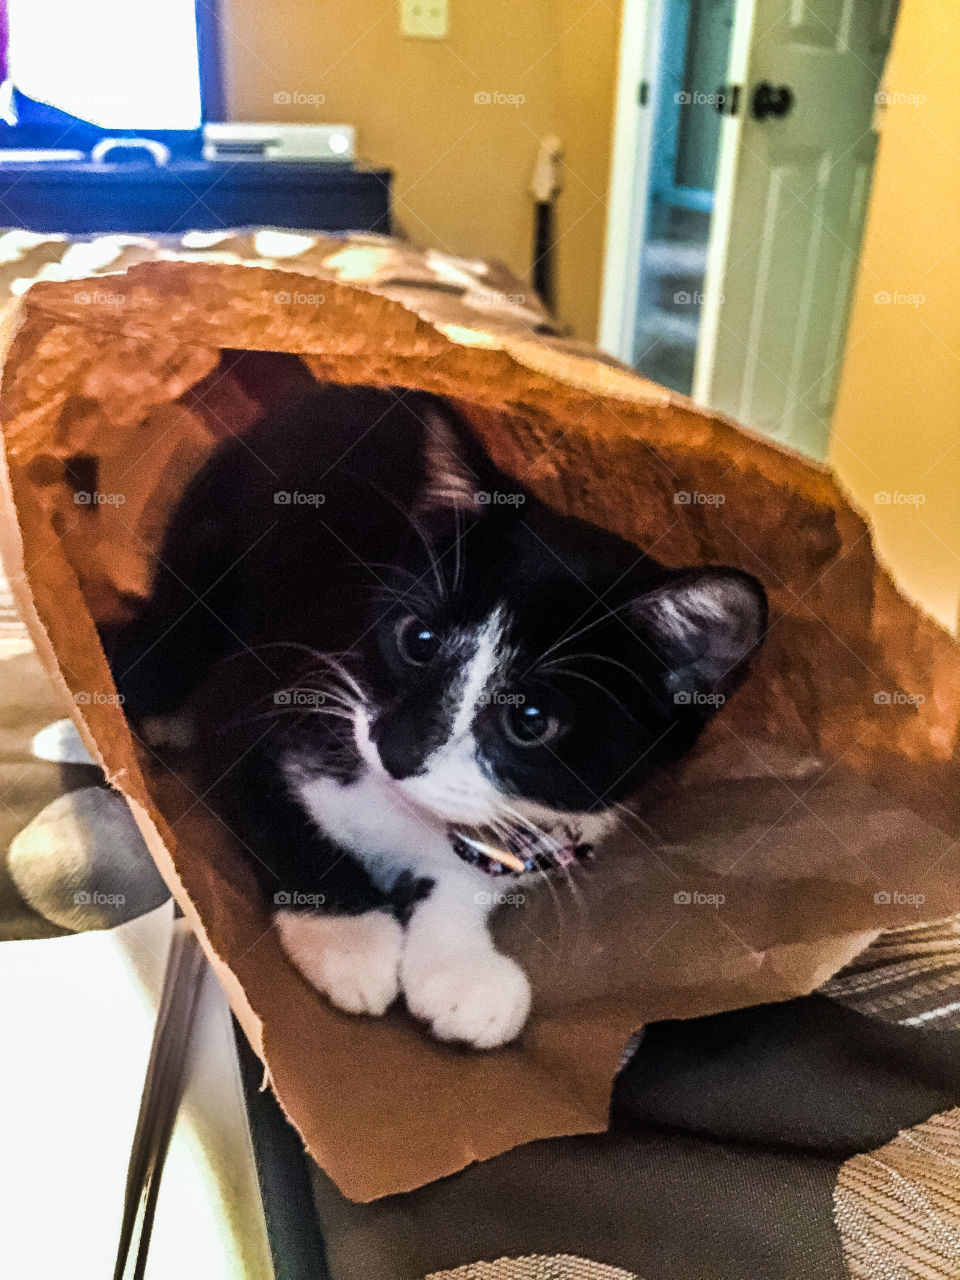 Someone should let the cat out of the bag.